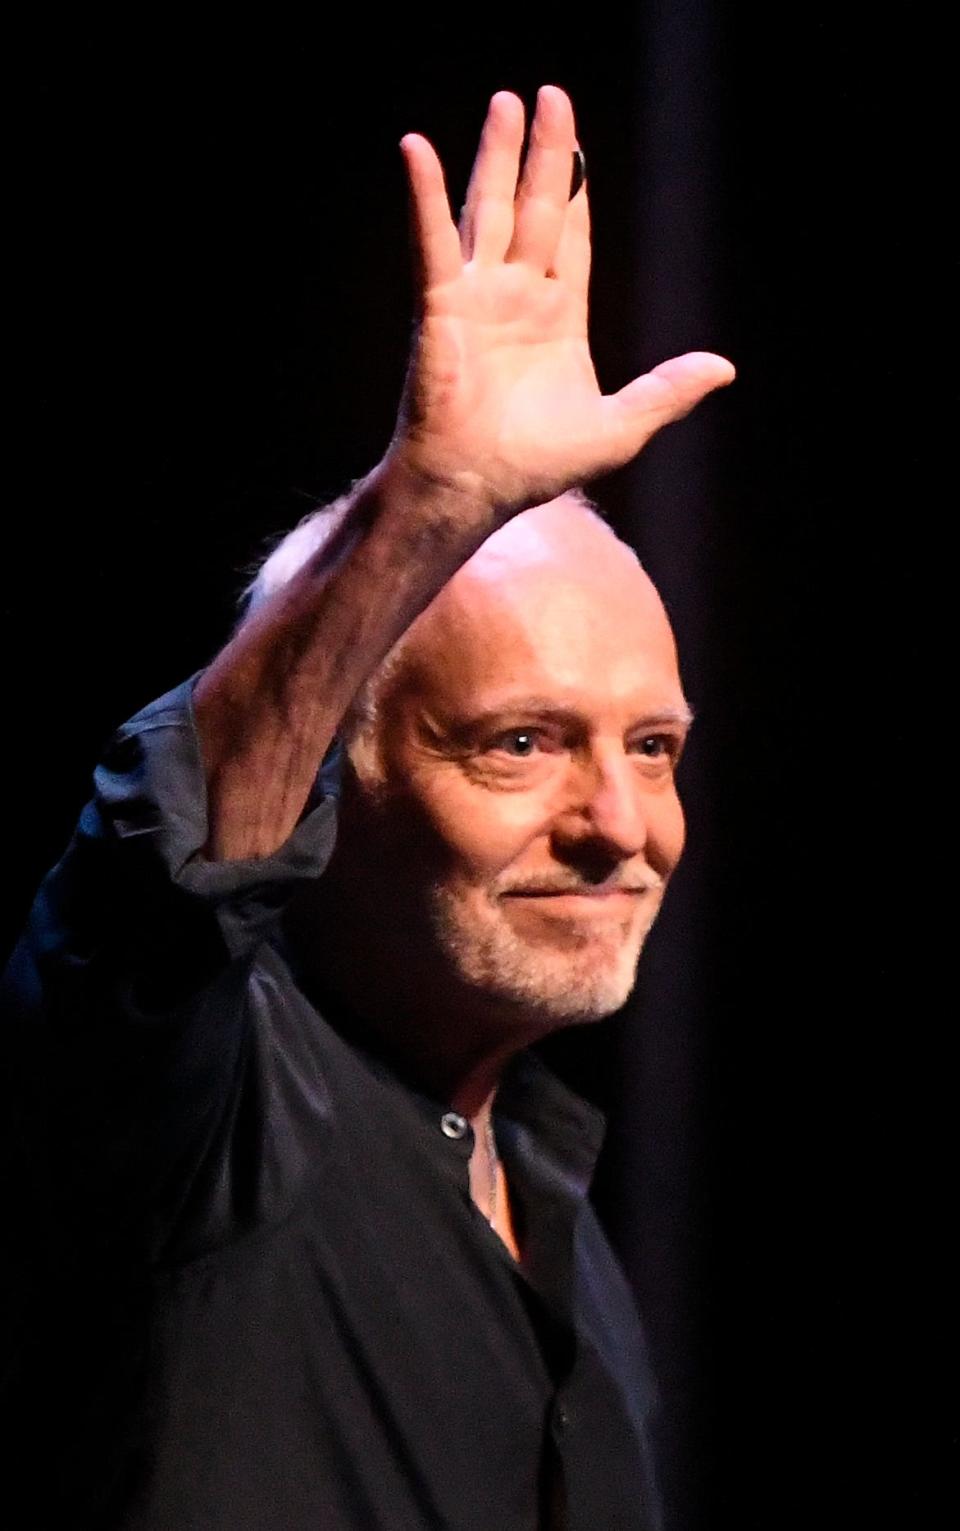 Peter Frampton waves to the crowd during Buddy Holly's 85th Birthday Bash, Saturday, Aug. 6, 2022, at the Buddy Holly Center. Artists did covers of Buddy Holly's music.